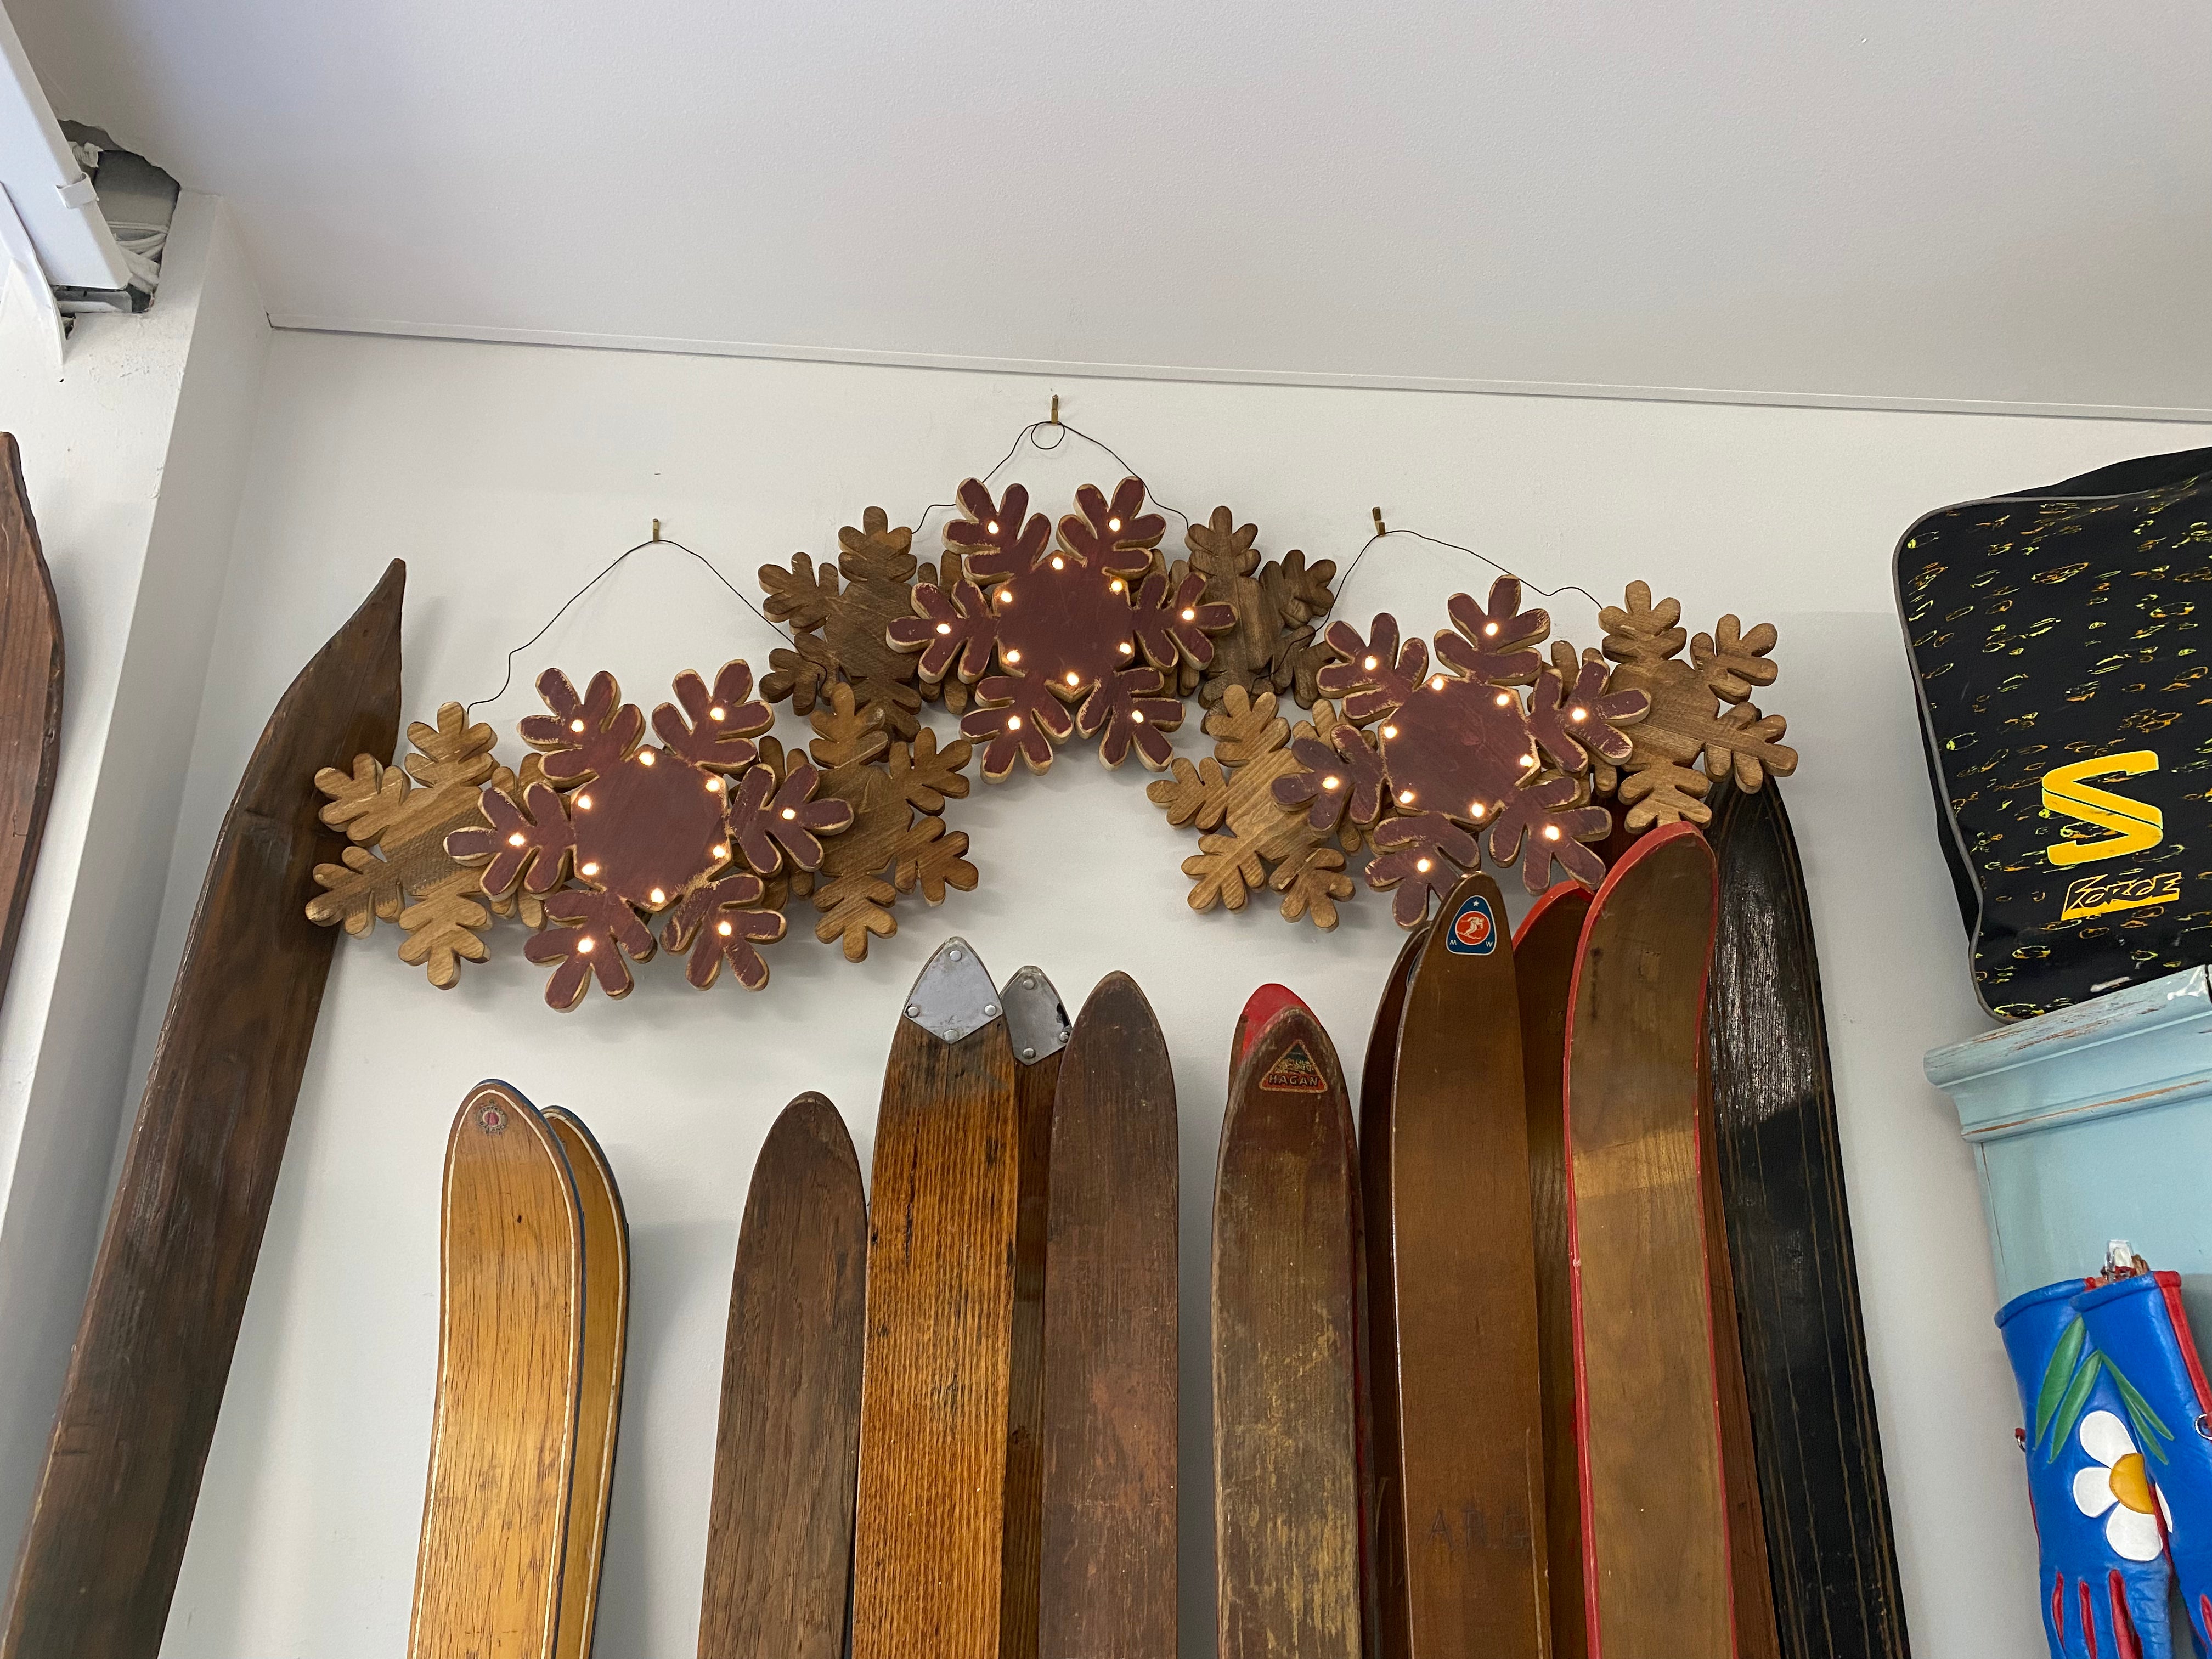 3 Wood snowflake wall decor with Led lights shown mid flash up on a white wall with 3 HAM Rabbit Prints & wooden skis underneath the snowflakes